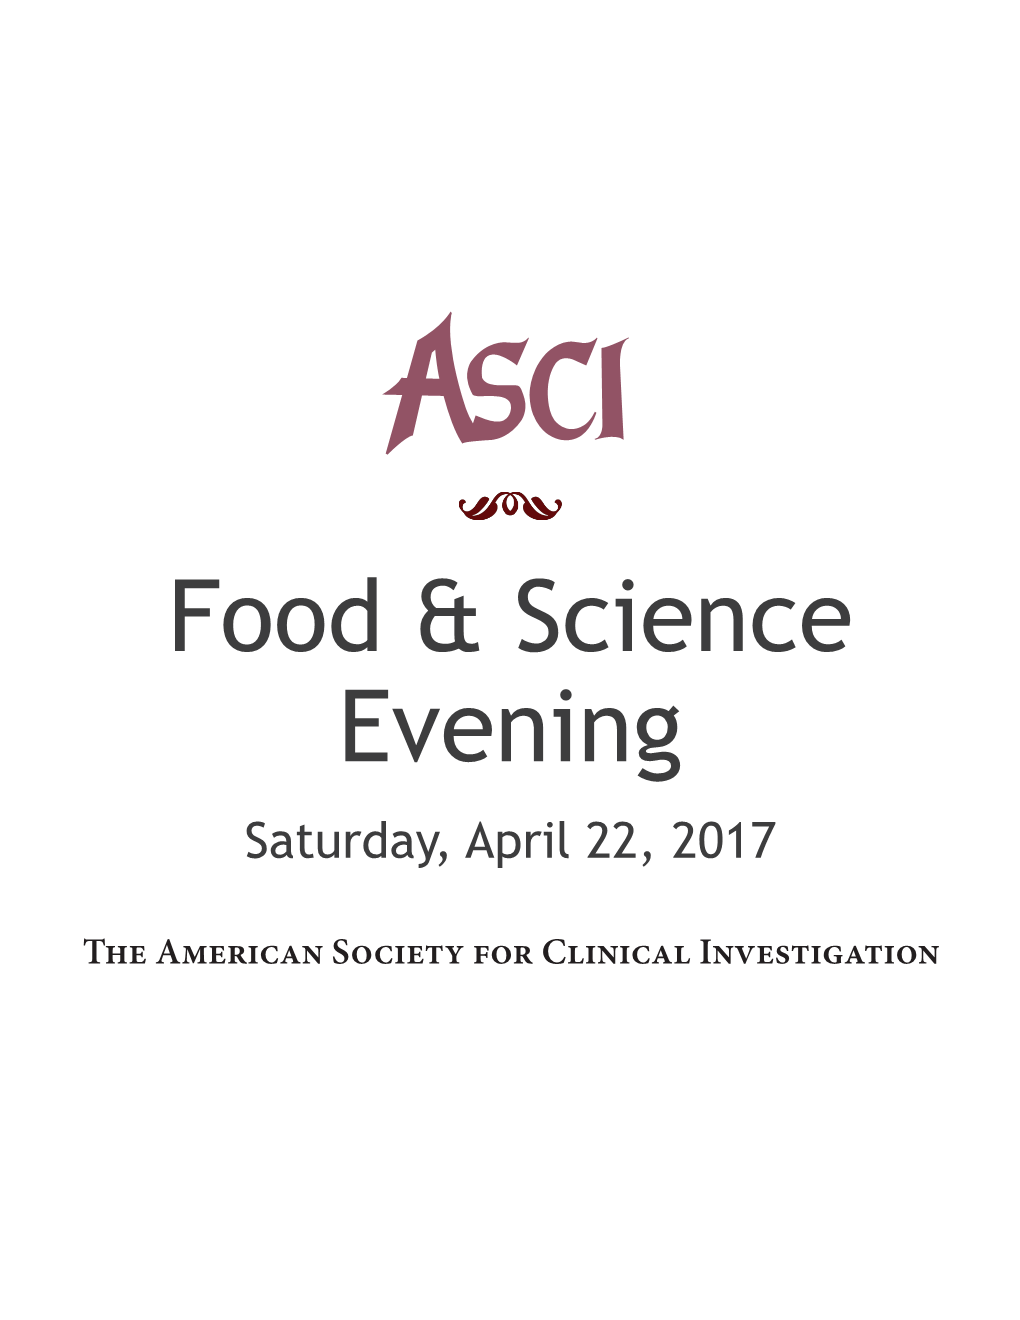 Food & Science Evening